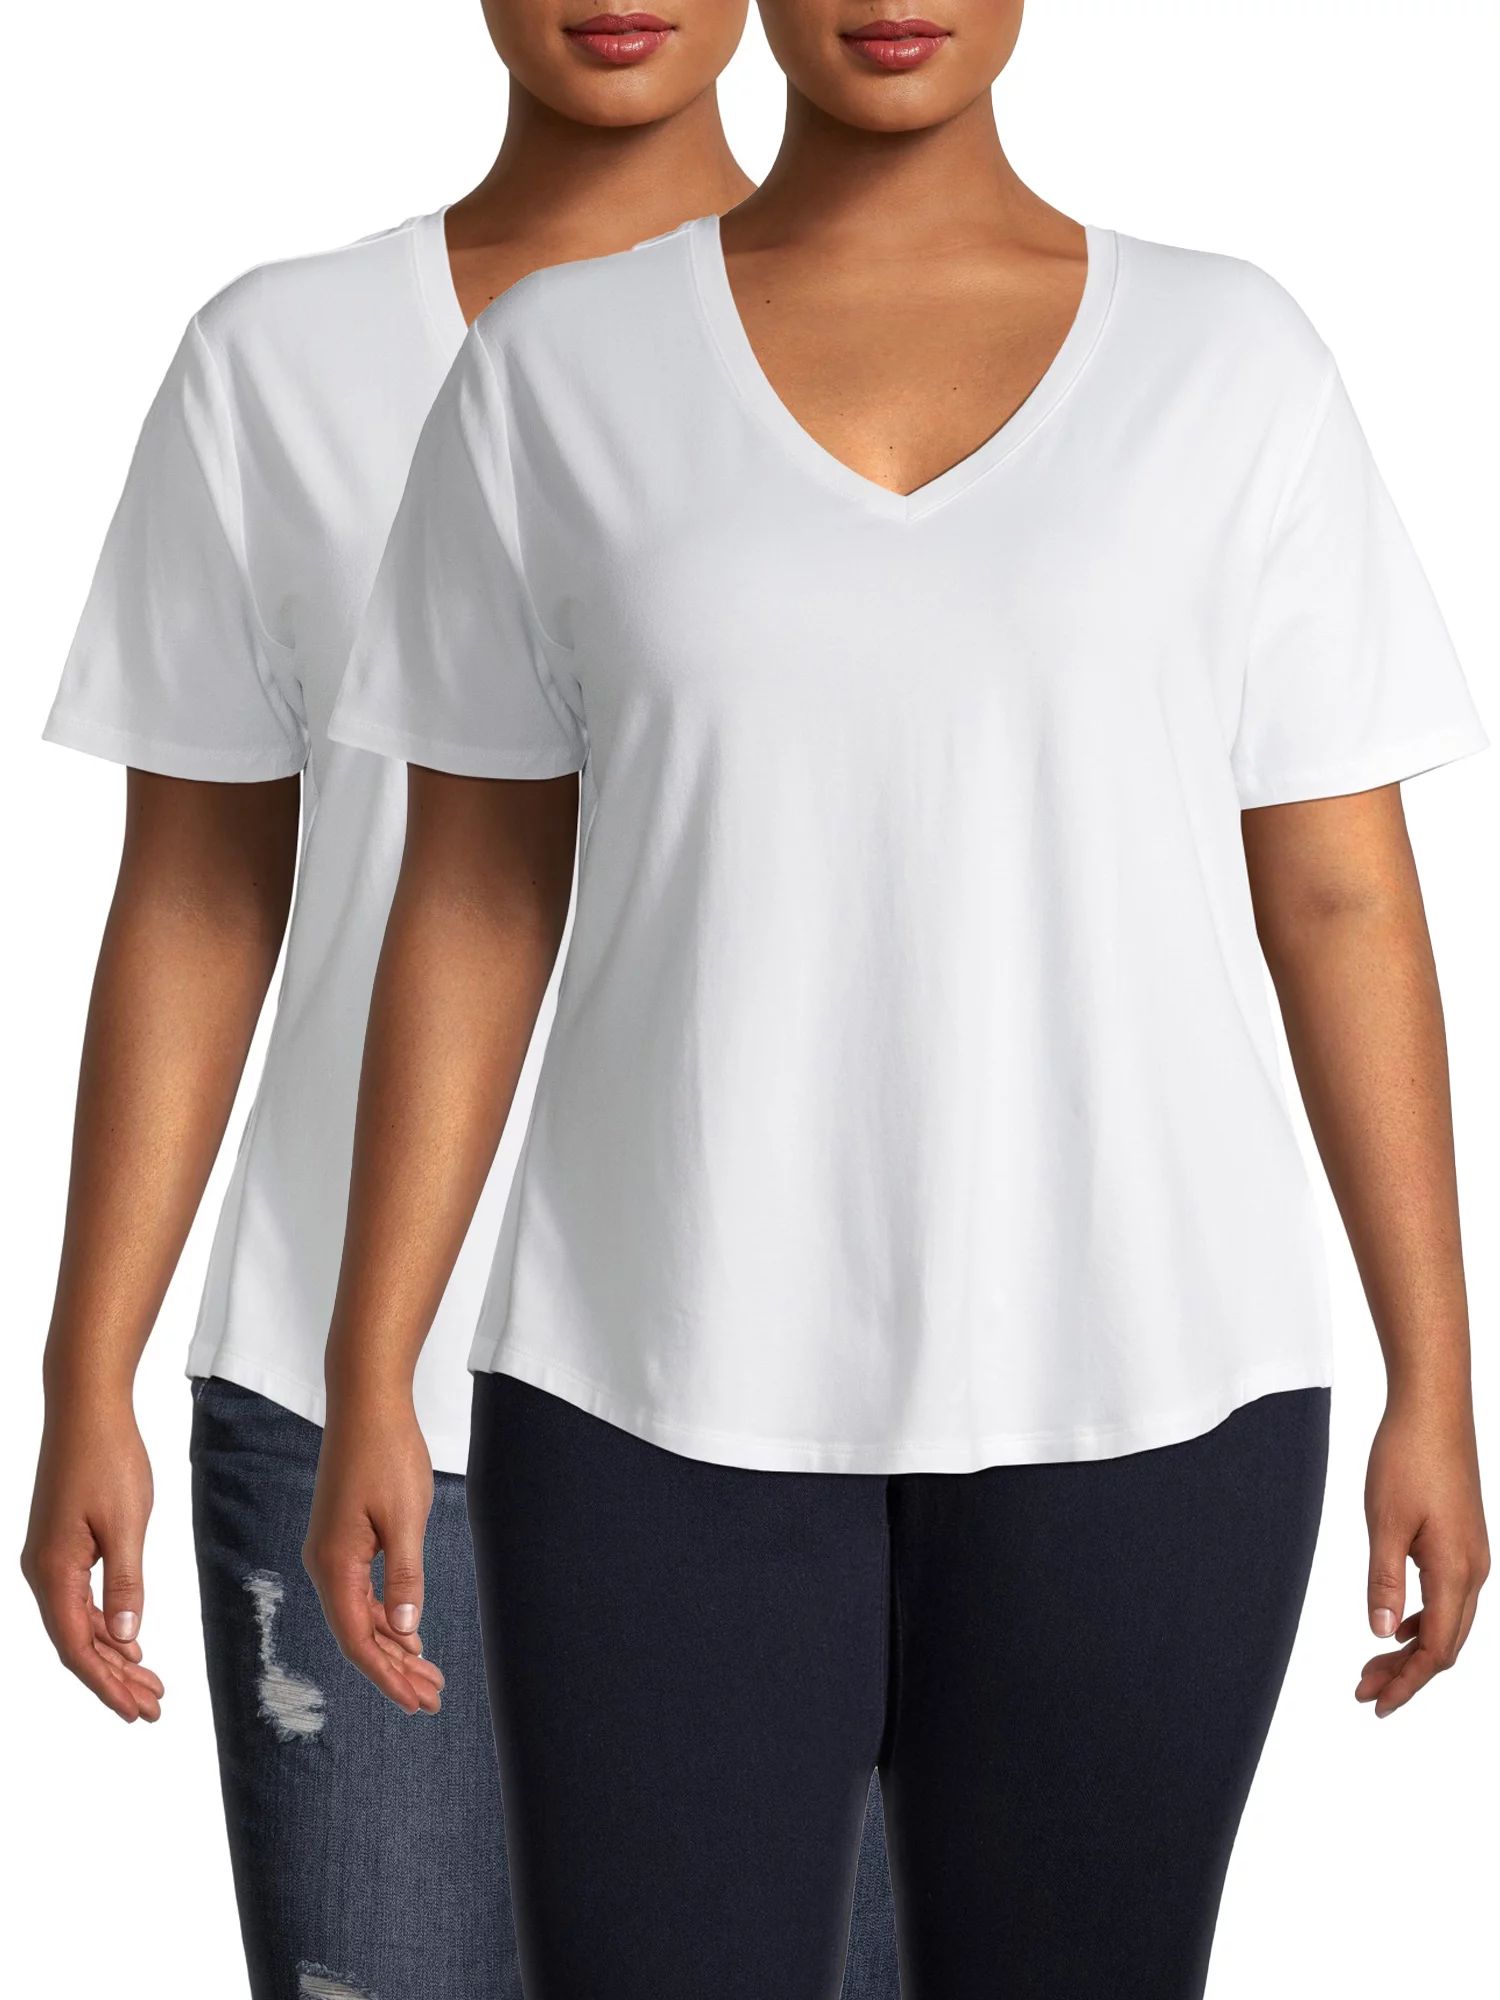 Terra & Sky Plus Size Everyday Essential V-Neck T-Shirt with Short Sleeves, 2-Pack | Walmart (US)